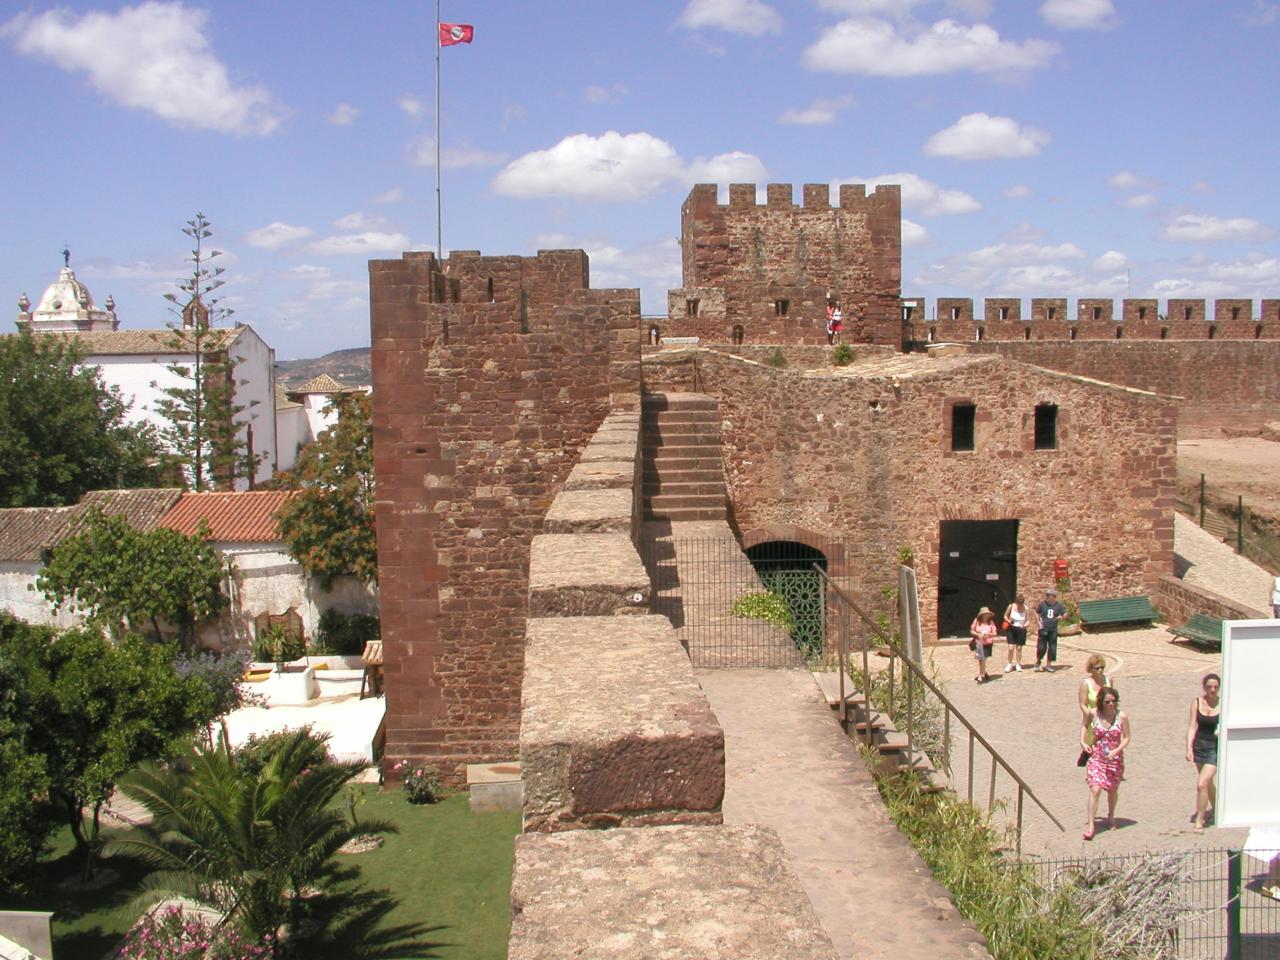 JPEG image - The fortifications in Silves ...